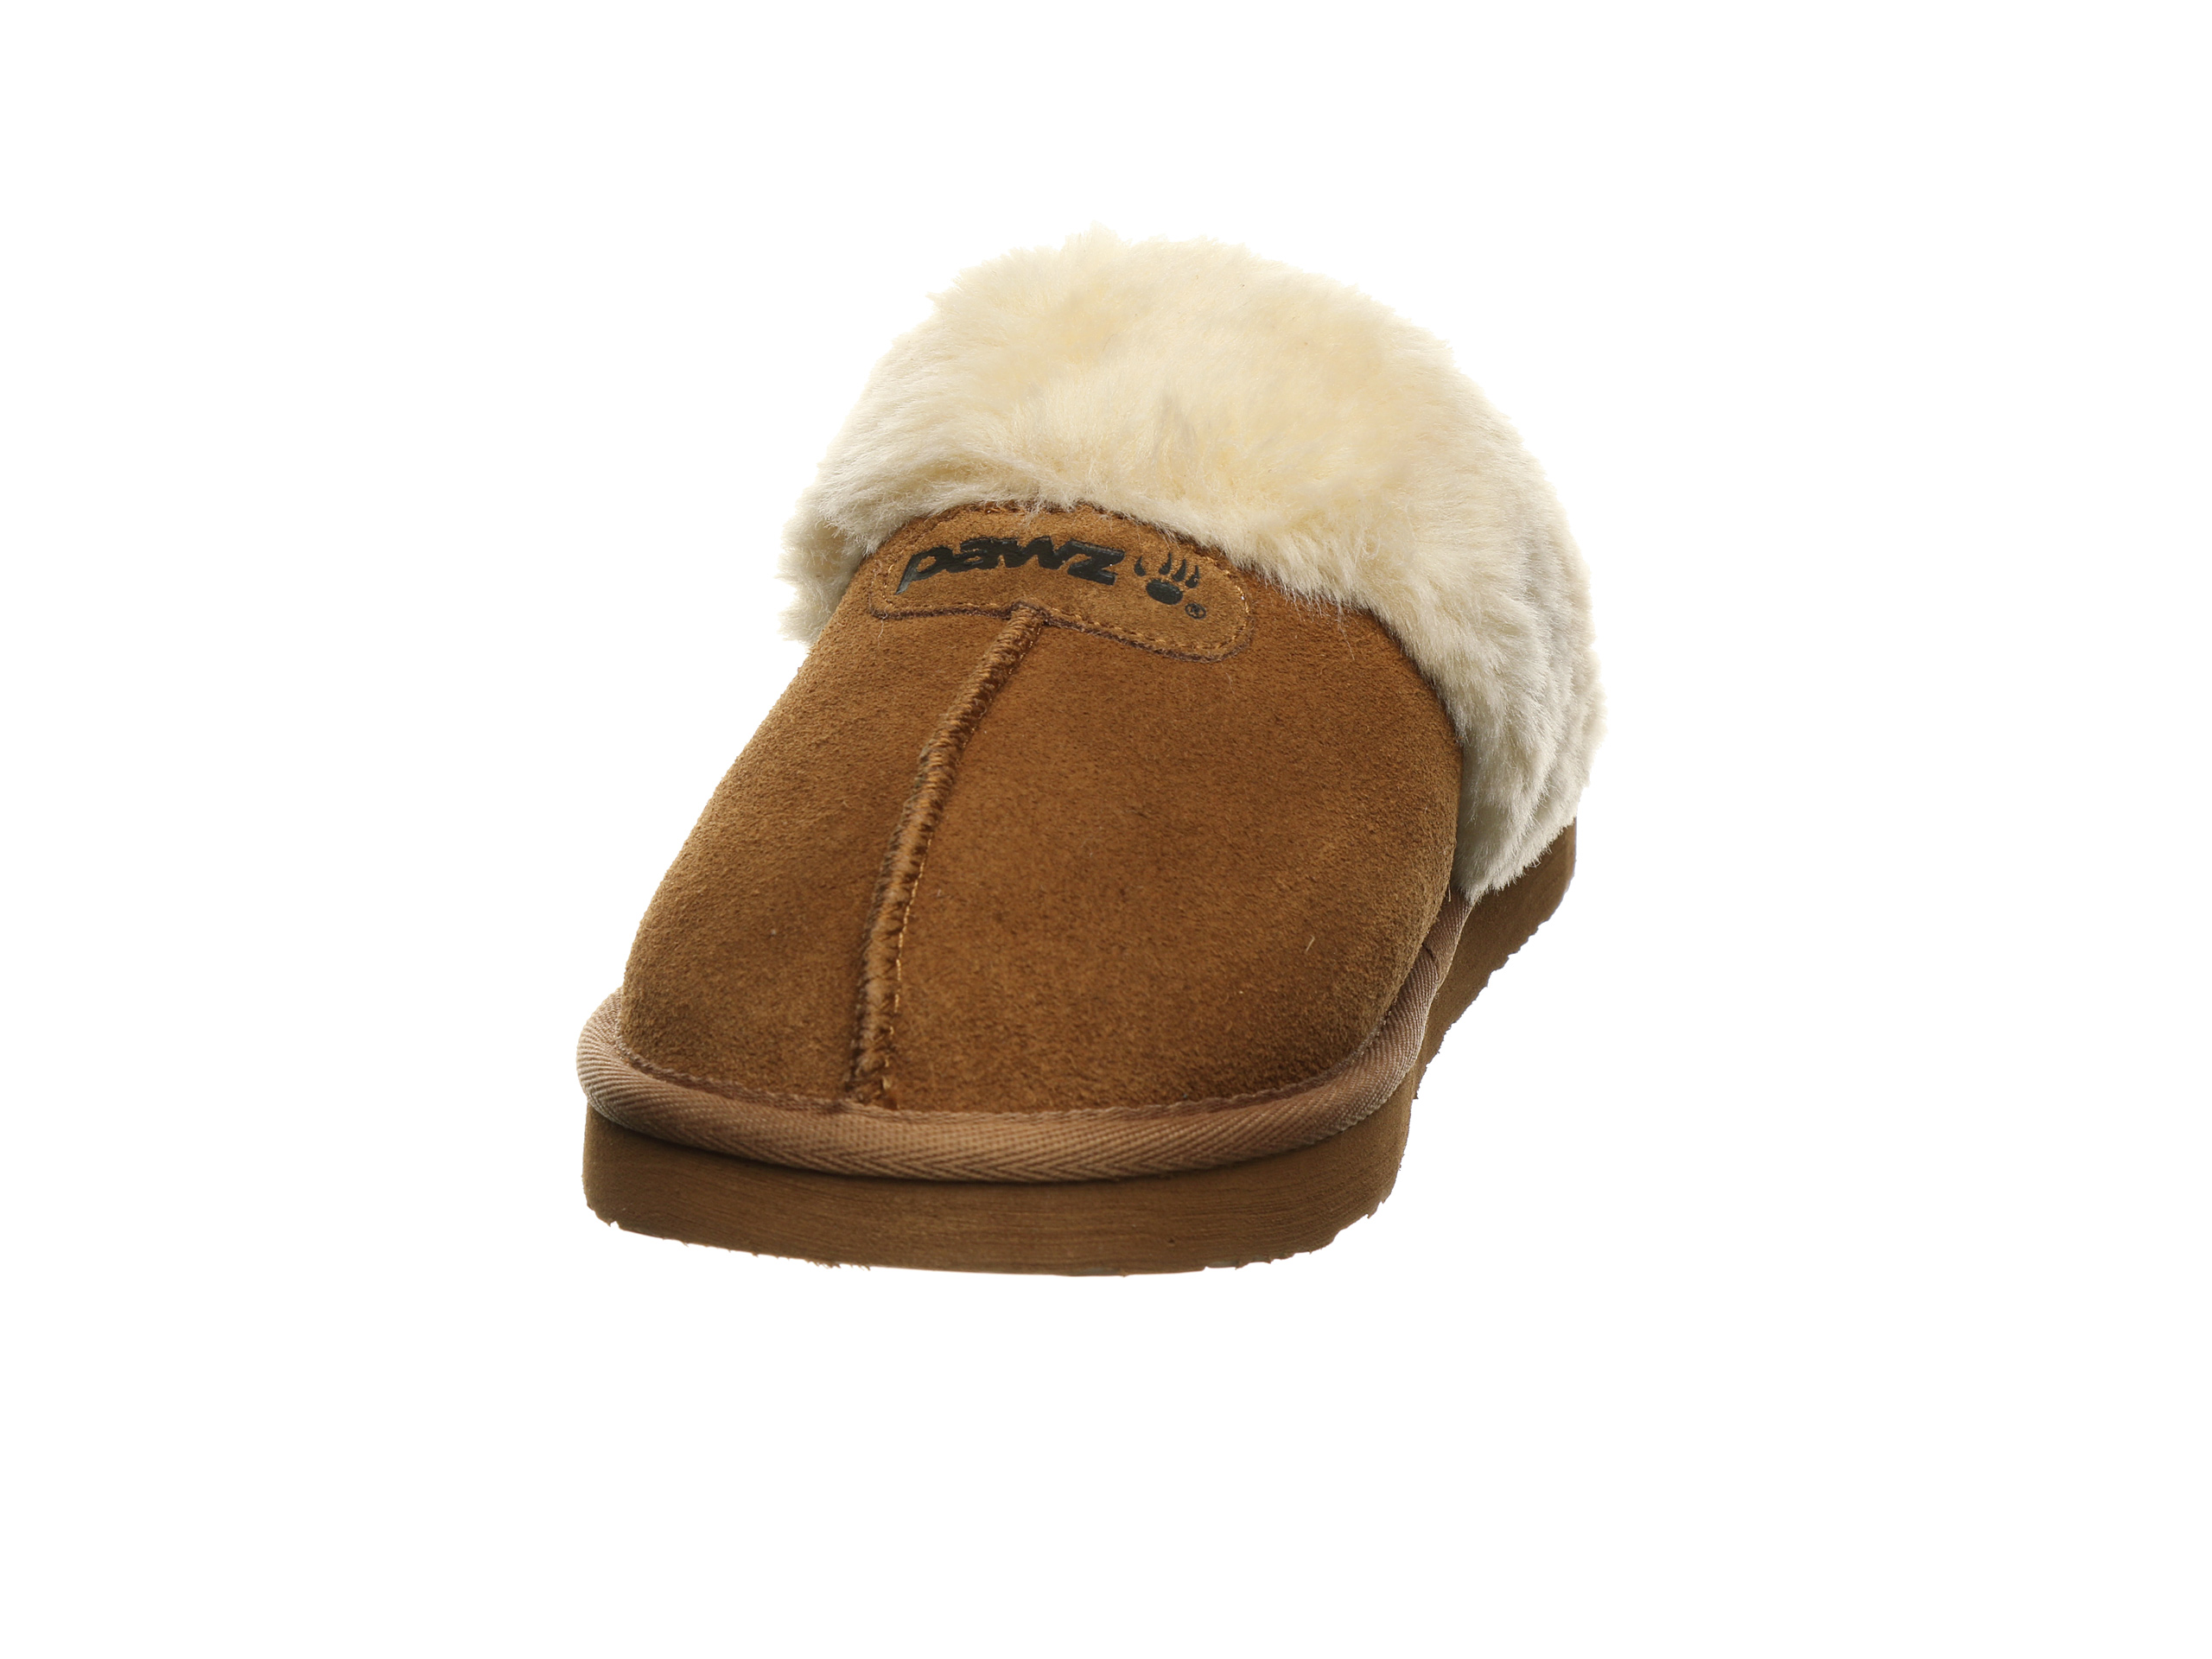 Pawz by Bearpaw Meredith Faux Fur Lined Suede Scuff Slipper (Women's) - image 3 of 15